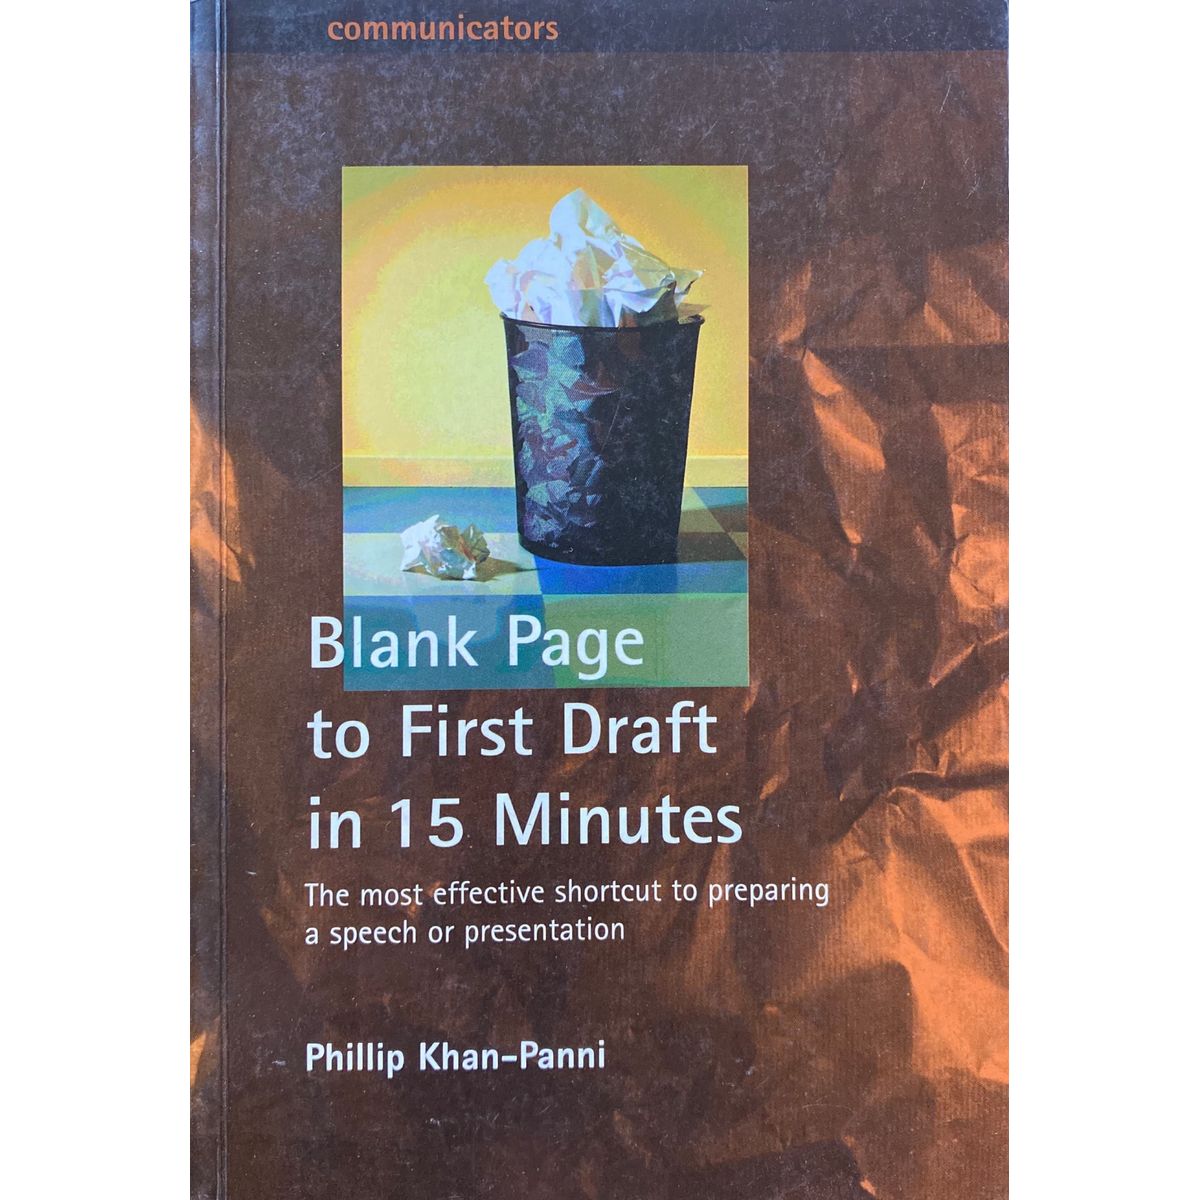 ISBN: 9781857037302 / 1857037308 - Blank Page to First Draft in 15 Minutes: The Most Effective Shortcut to Preparing a Speech or Presentation by Phillip Khan-Panni [2001]